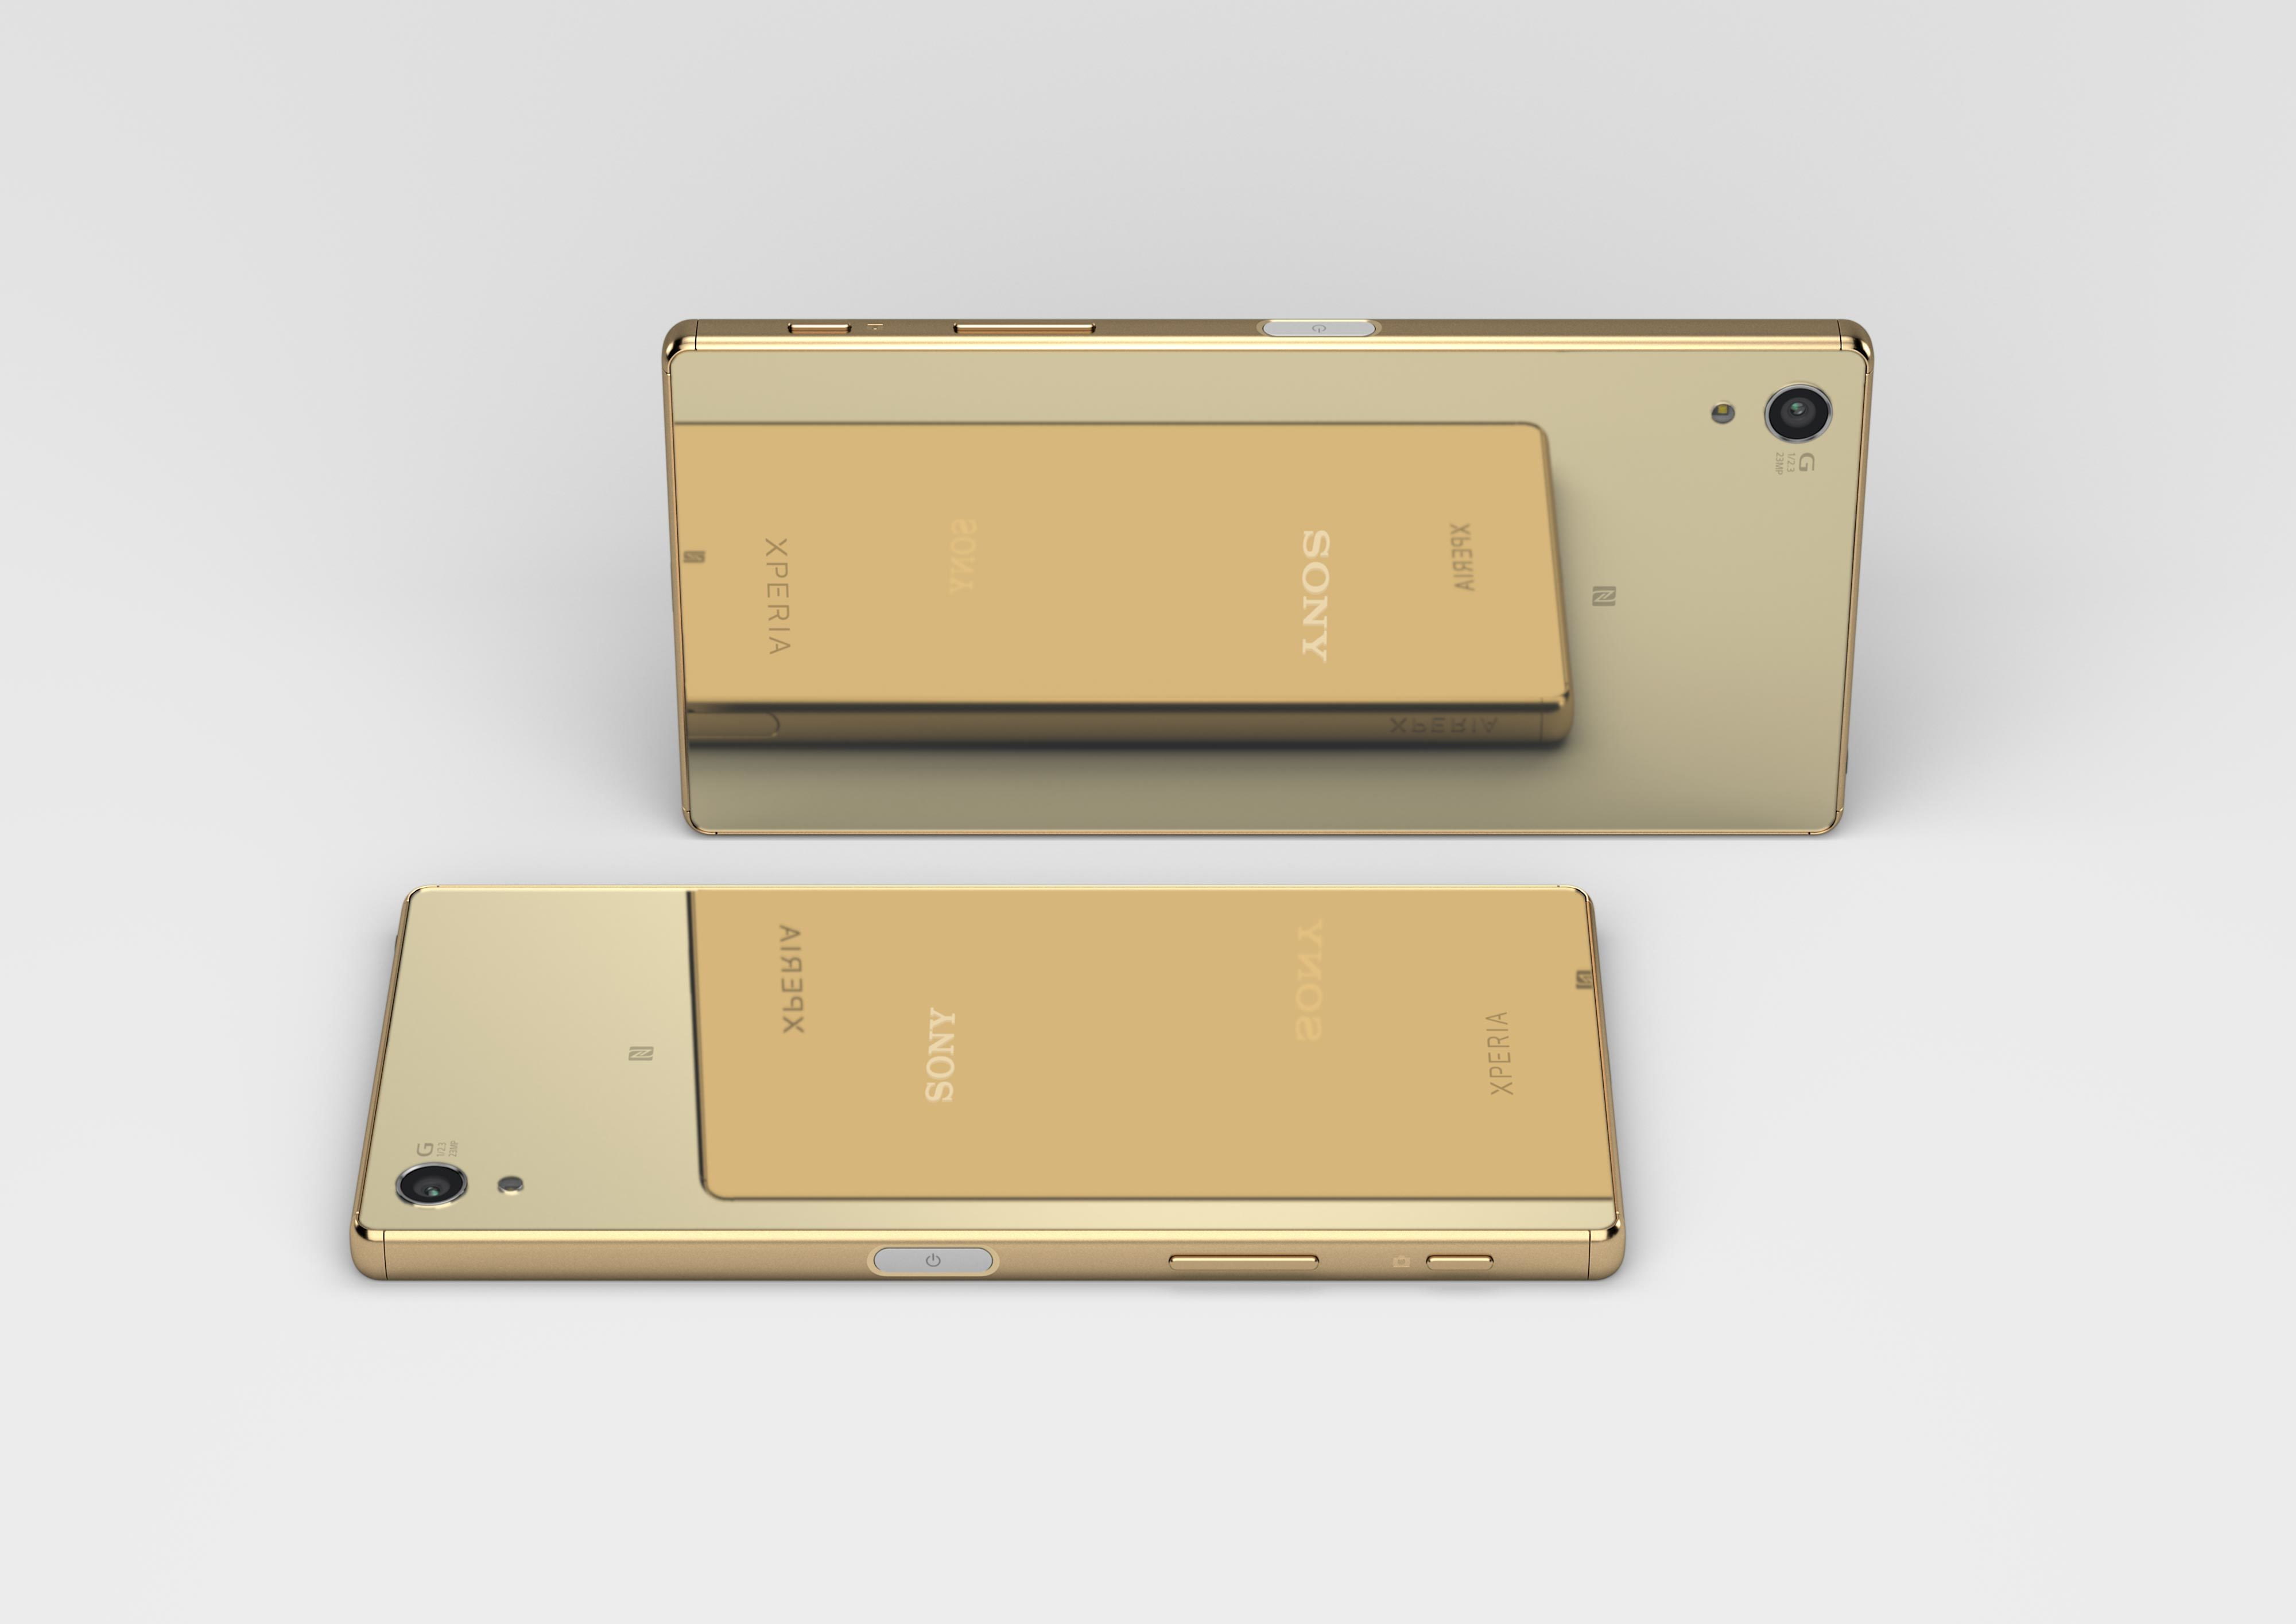 gold Sony Xperia Android smartphone, hitech, white background